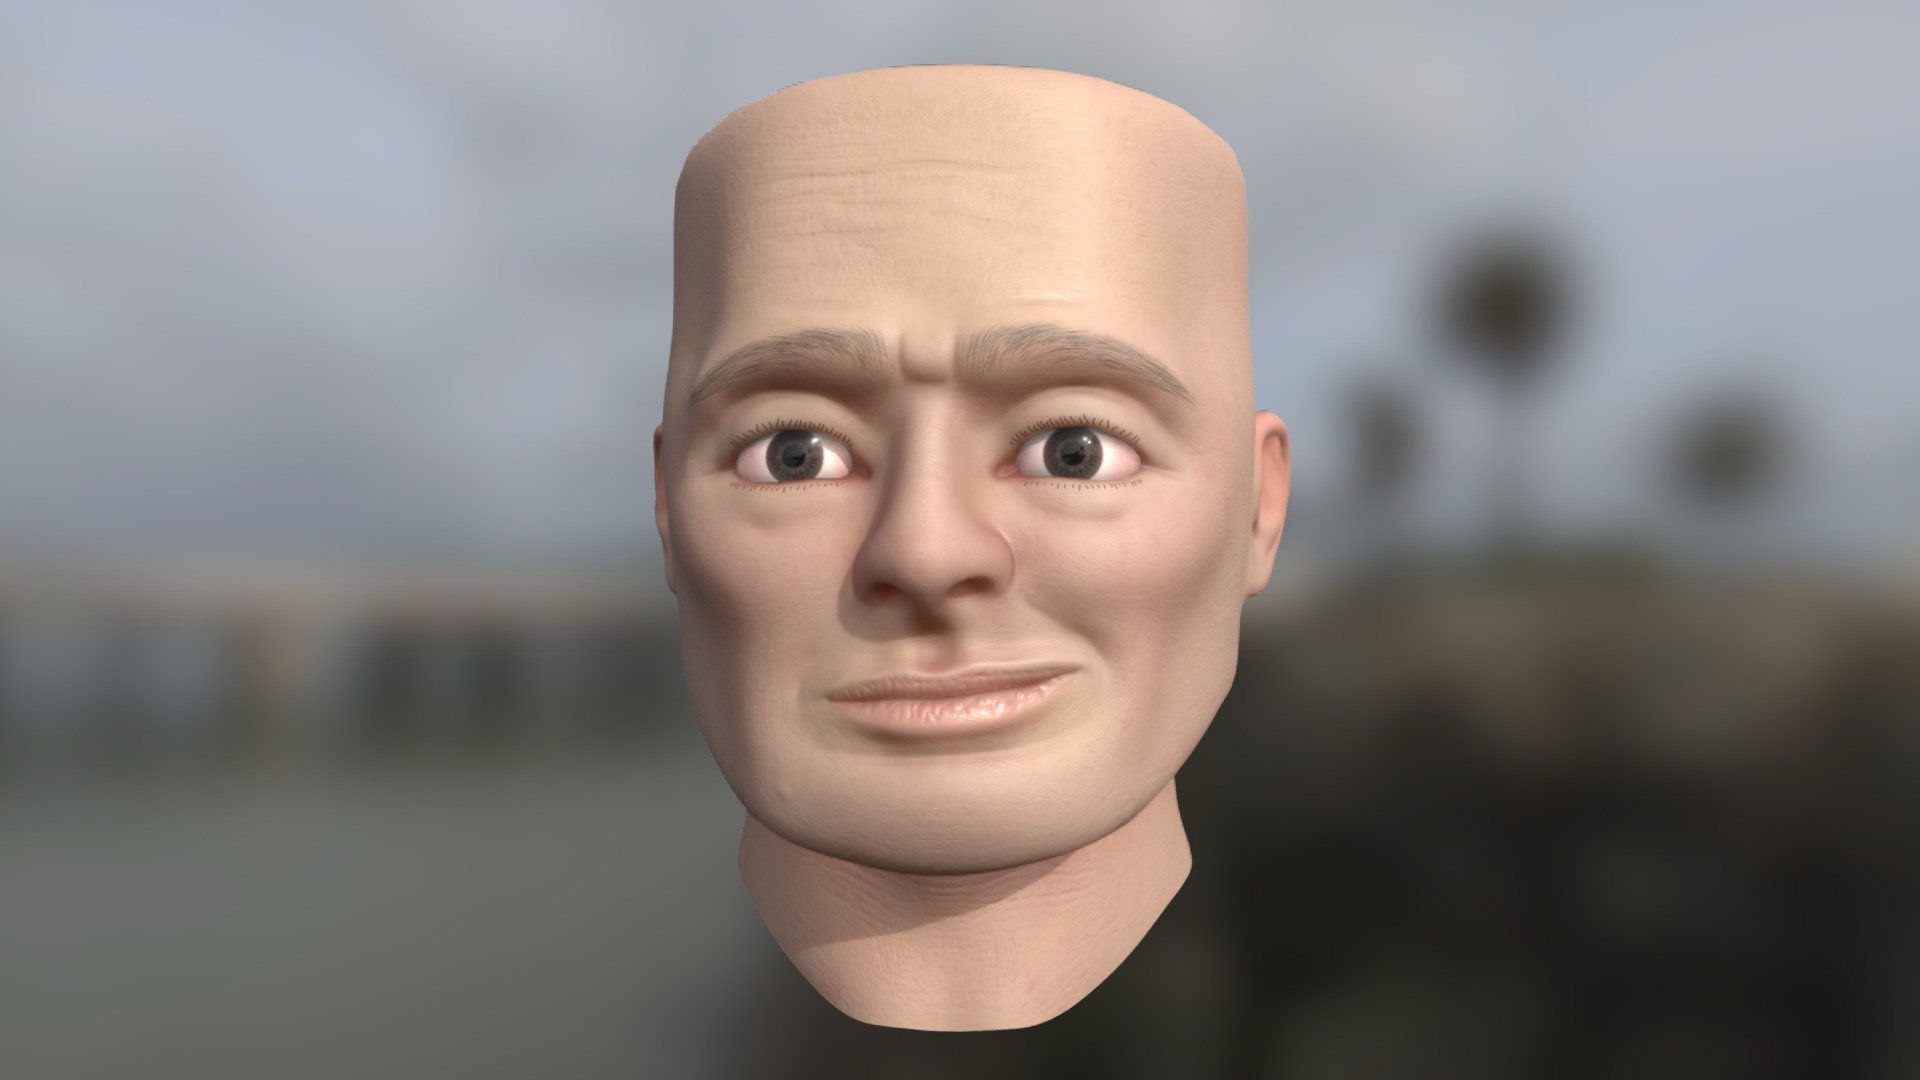 7 Roblox Man Face Images, Stock Photos, 3D objects, & Vectors